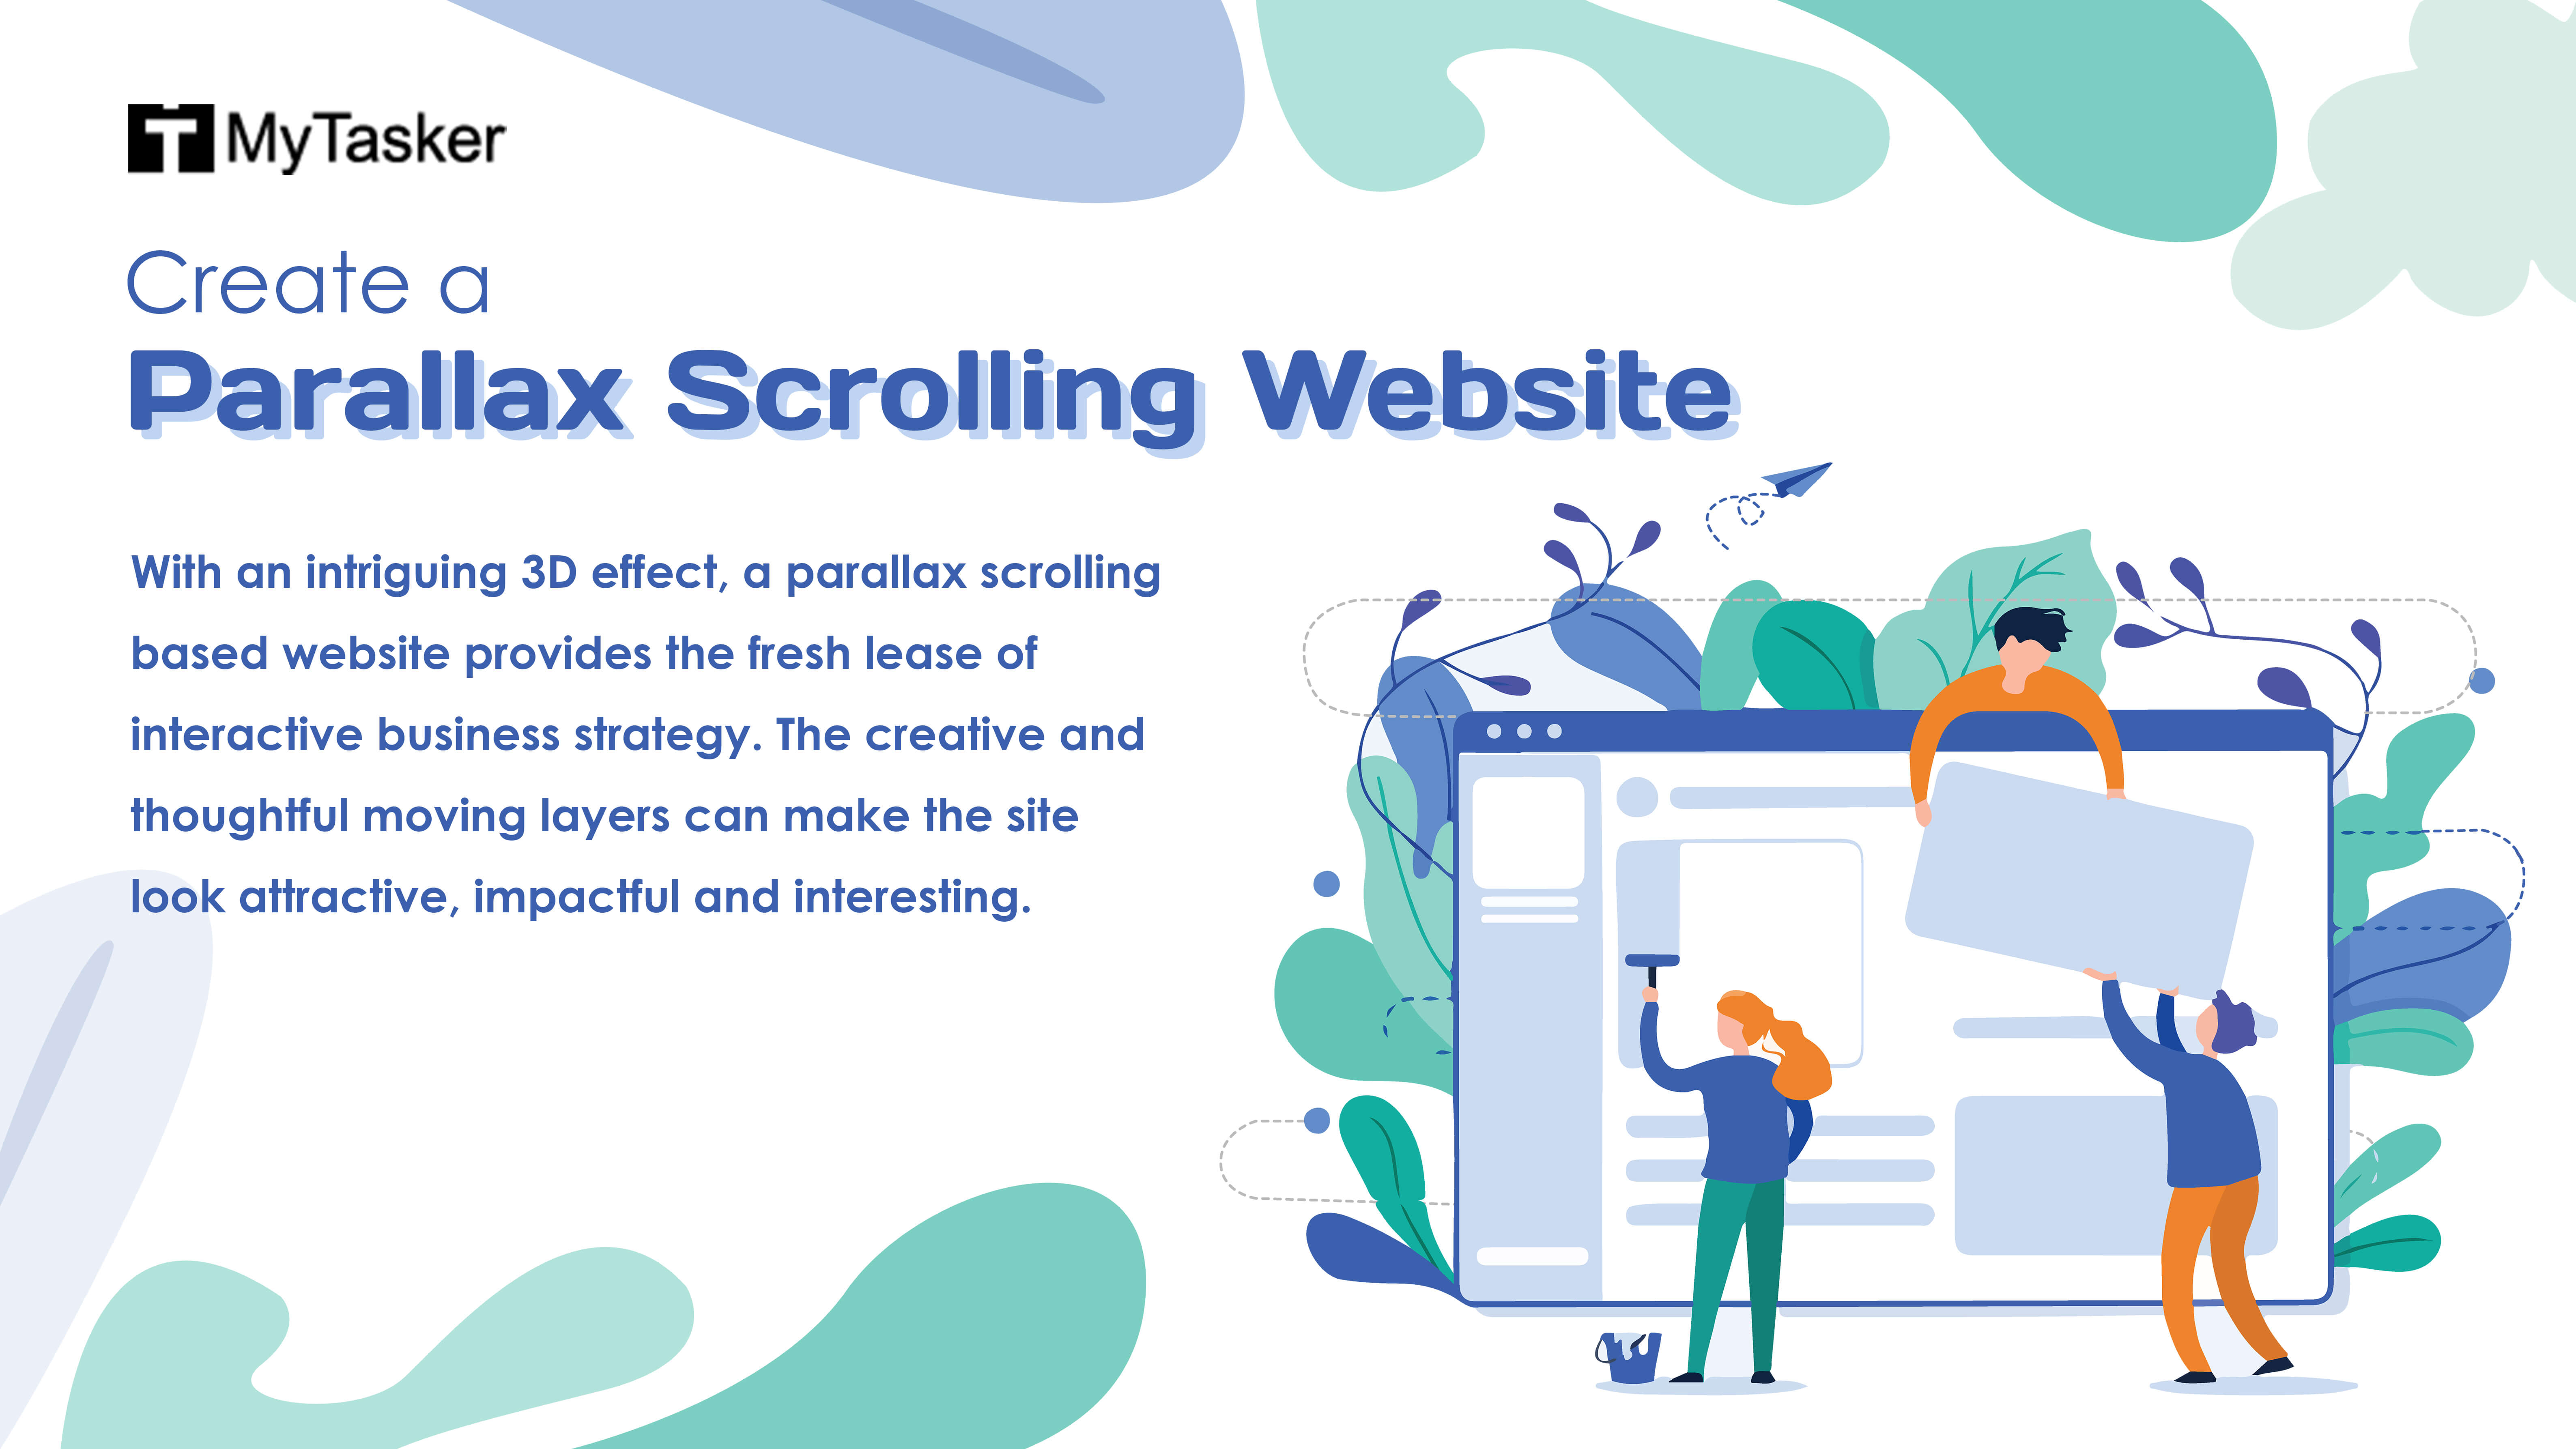 How to Create a Parallax Scrolling Website